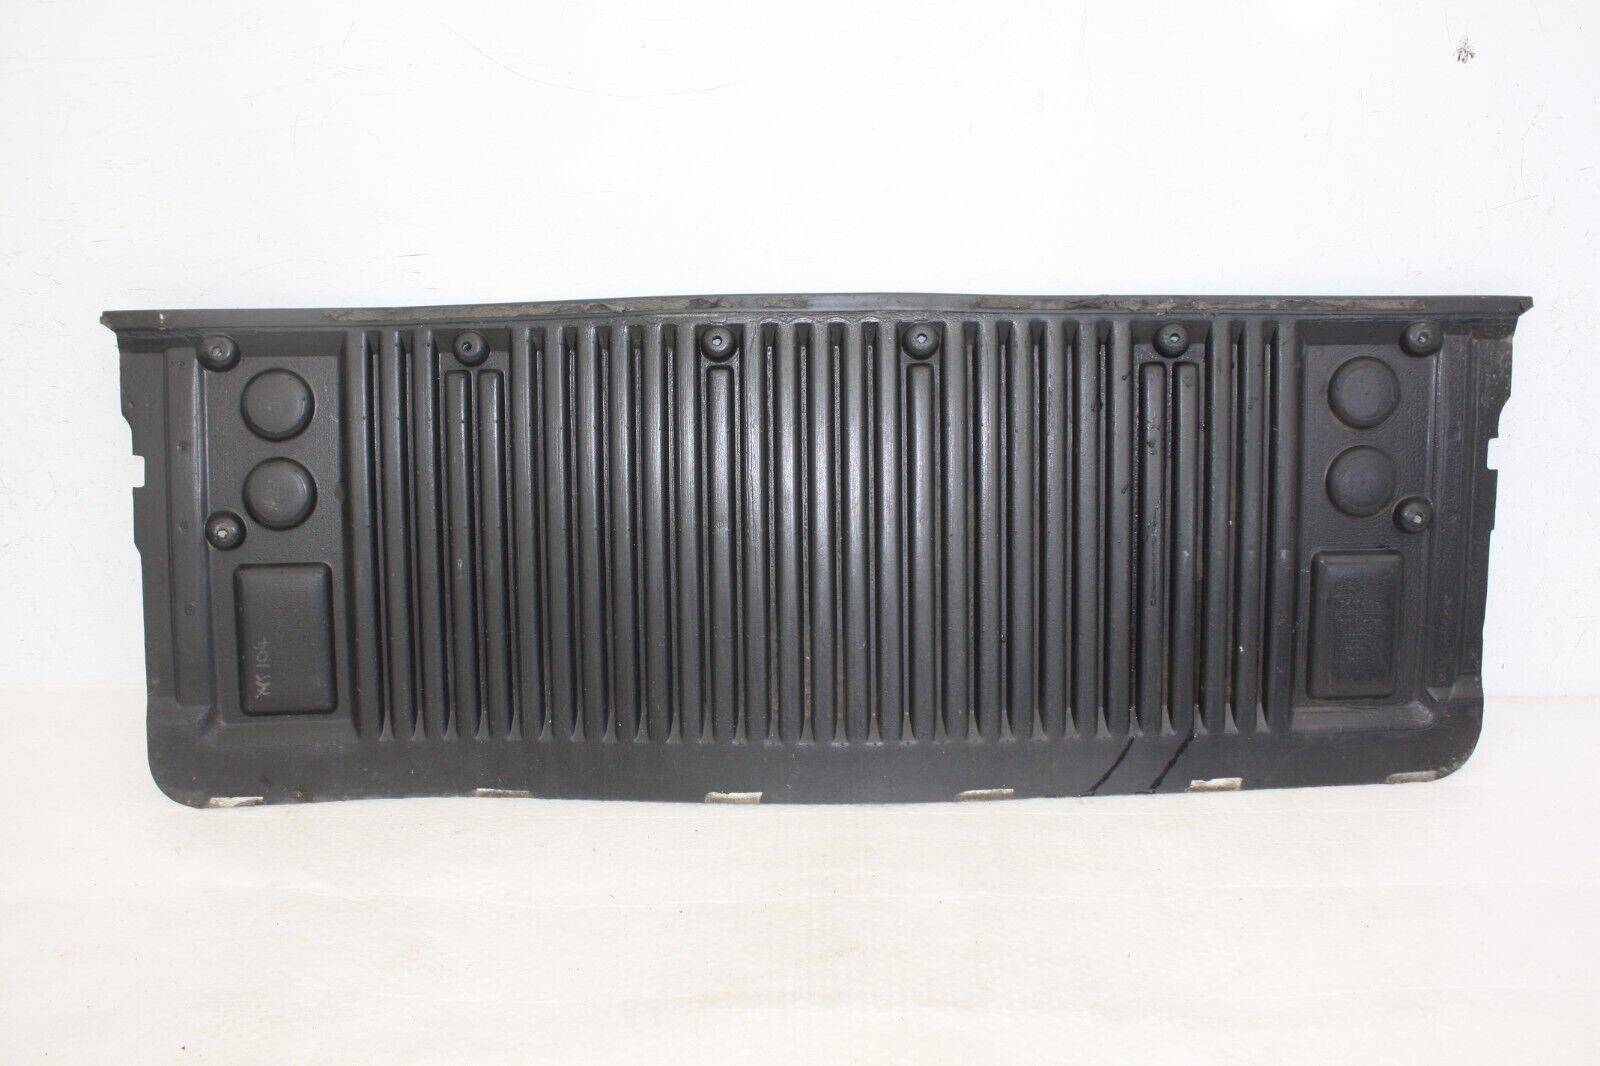 Ford-Ranger-Tailgate-Liner-Protector-Cover-AB39-2140726-Genuine-176321614493